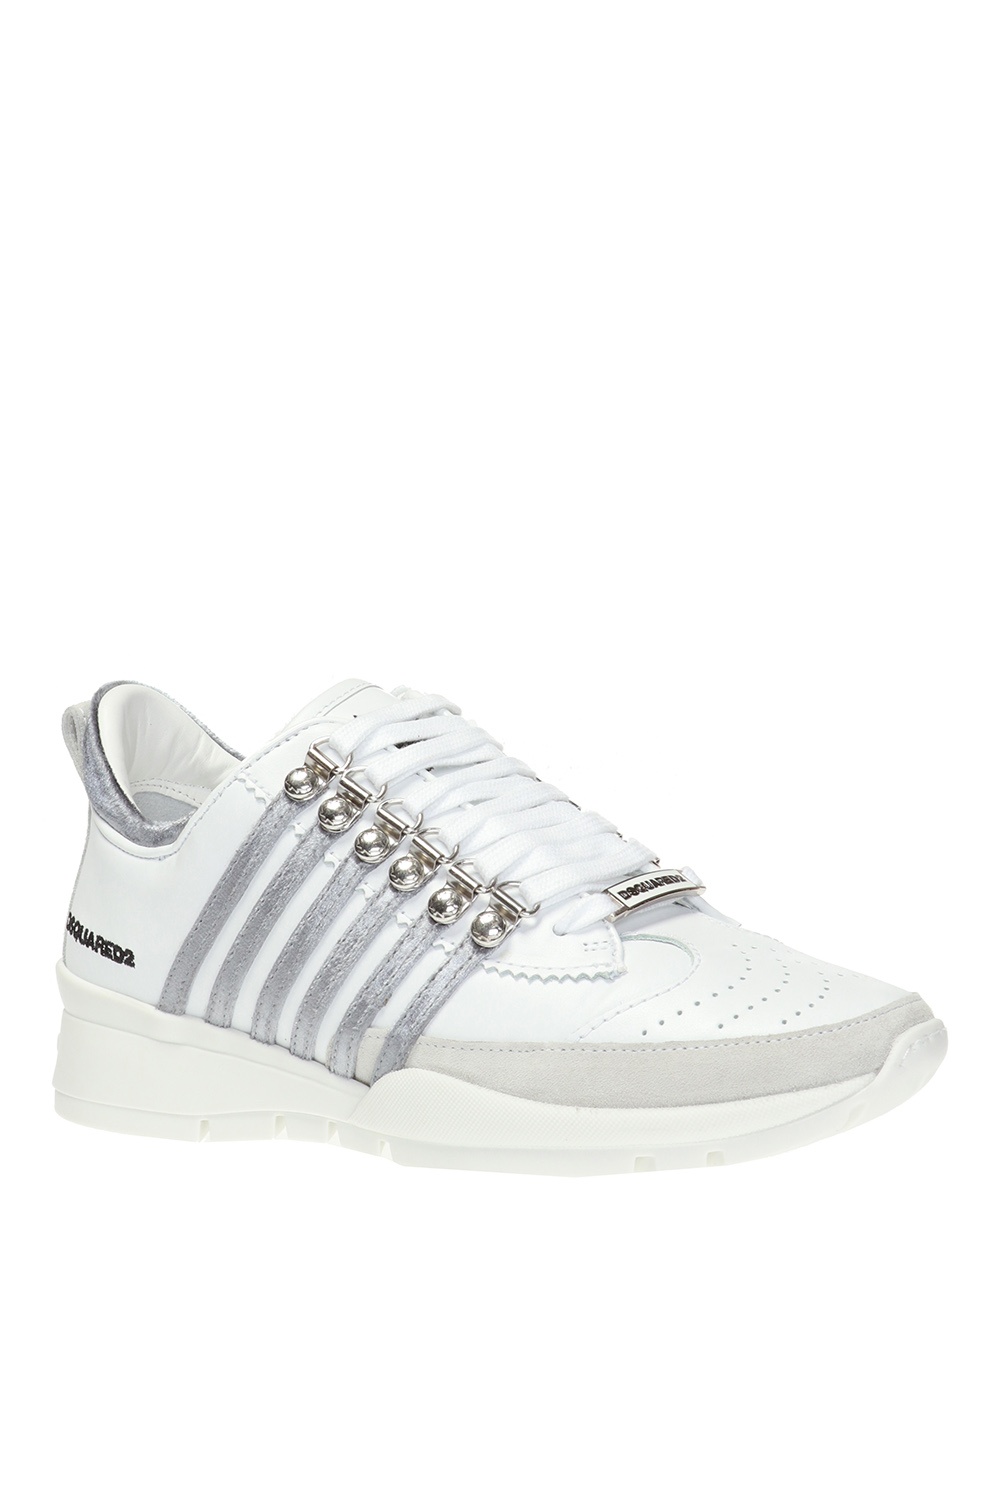 Details about   Dsquared2 Womens 251 Sneakers Trainers Runners Lace Up Padded Casual Sport Shoes 